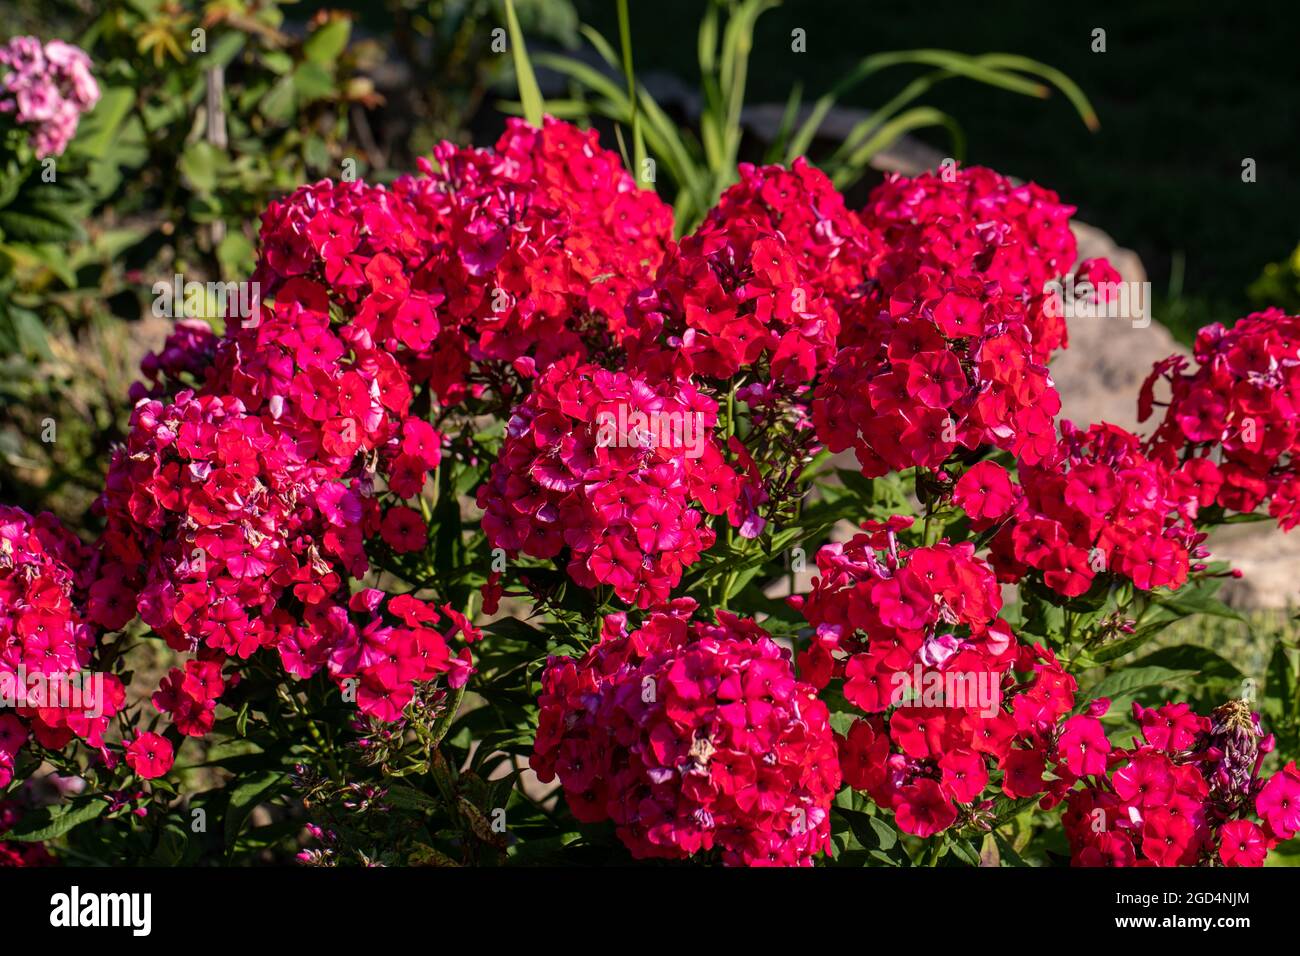 Flowering branch of red phlox in the garden Stock Photo